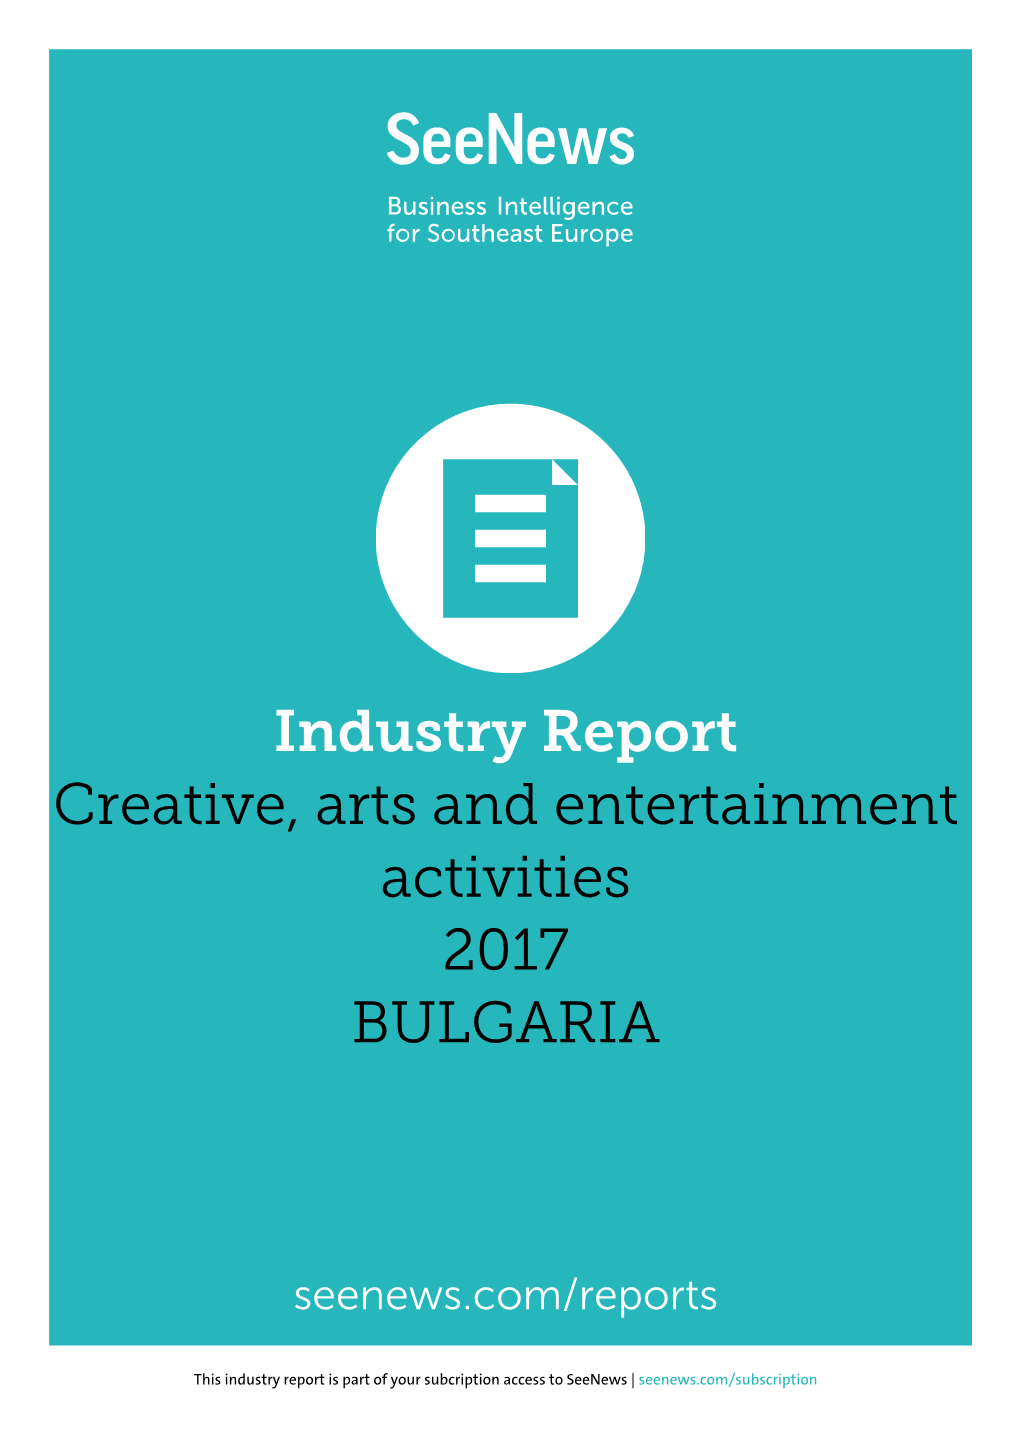 Industry Report Creative, Arts and Entertainment Activities 2017 BULGARIA